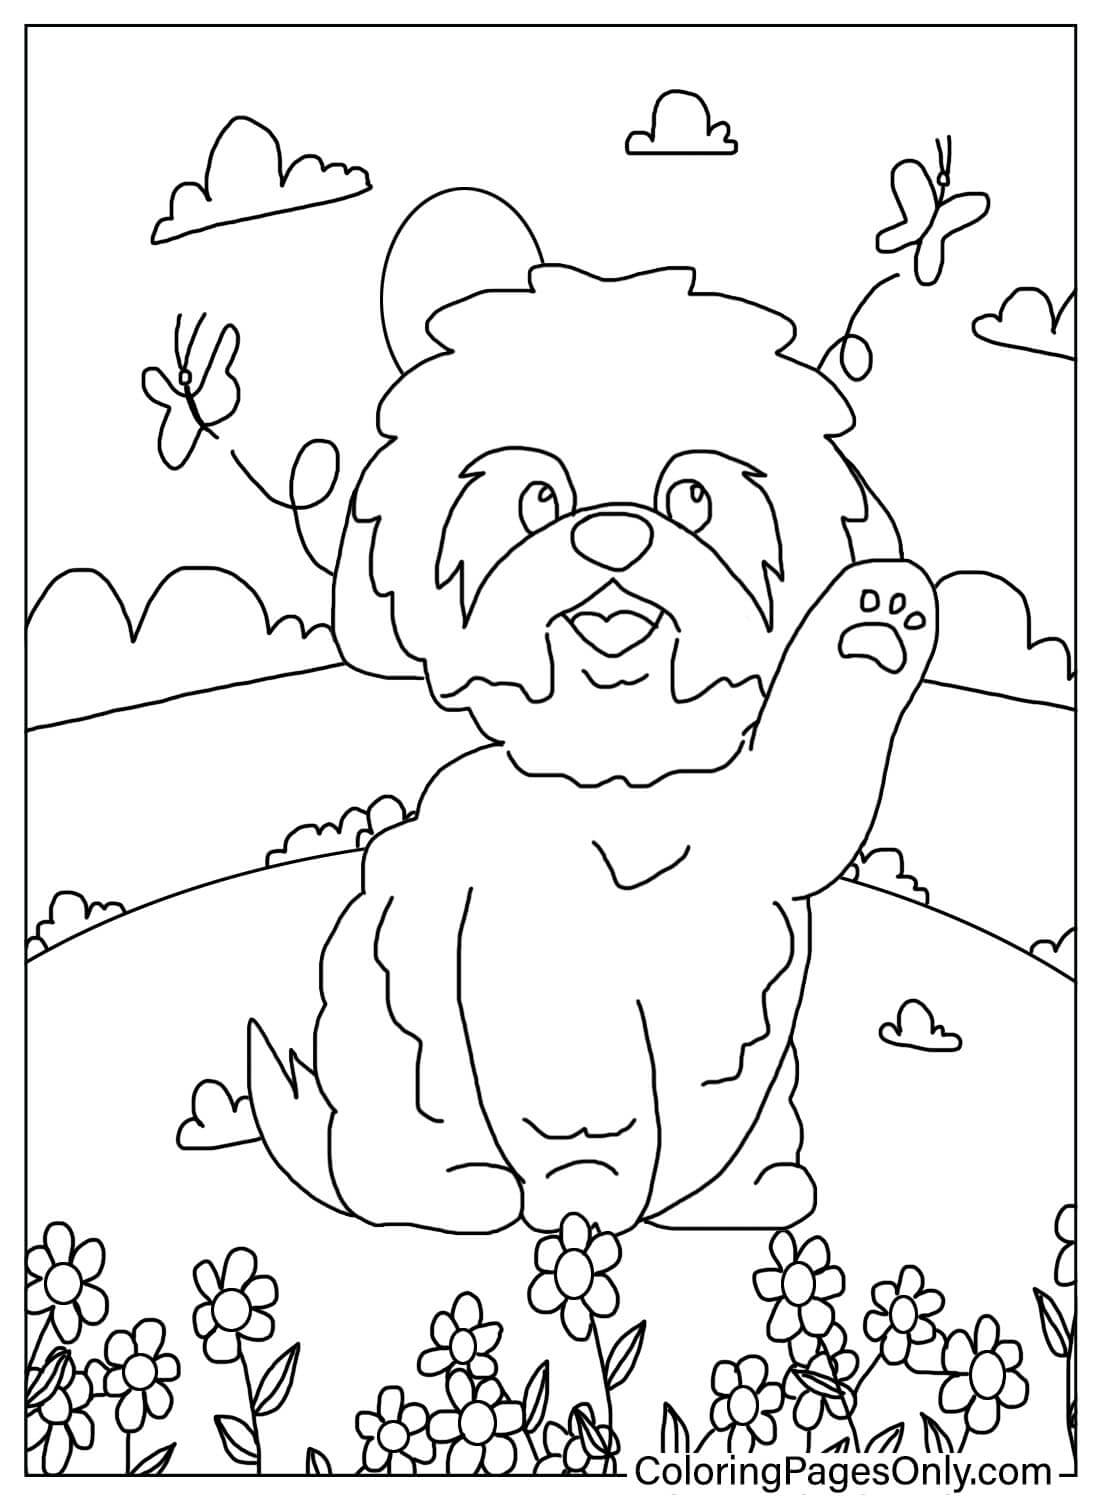 Free Coloring Pages Shih Tzu from Shih Tzu